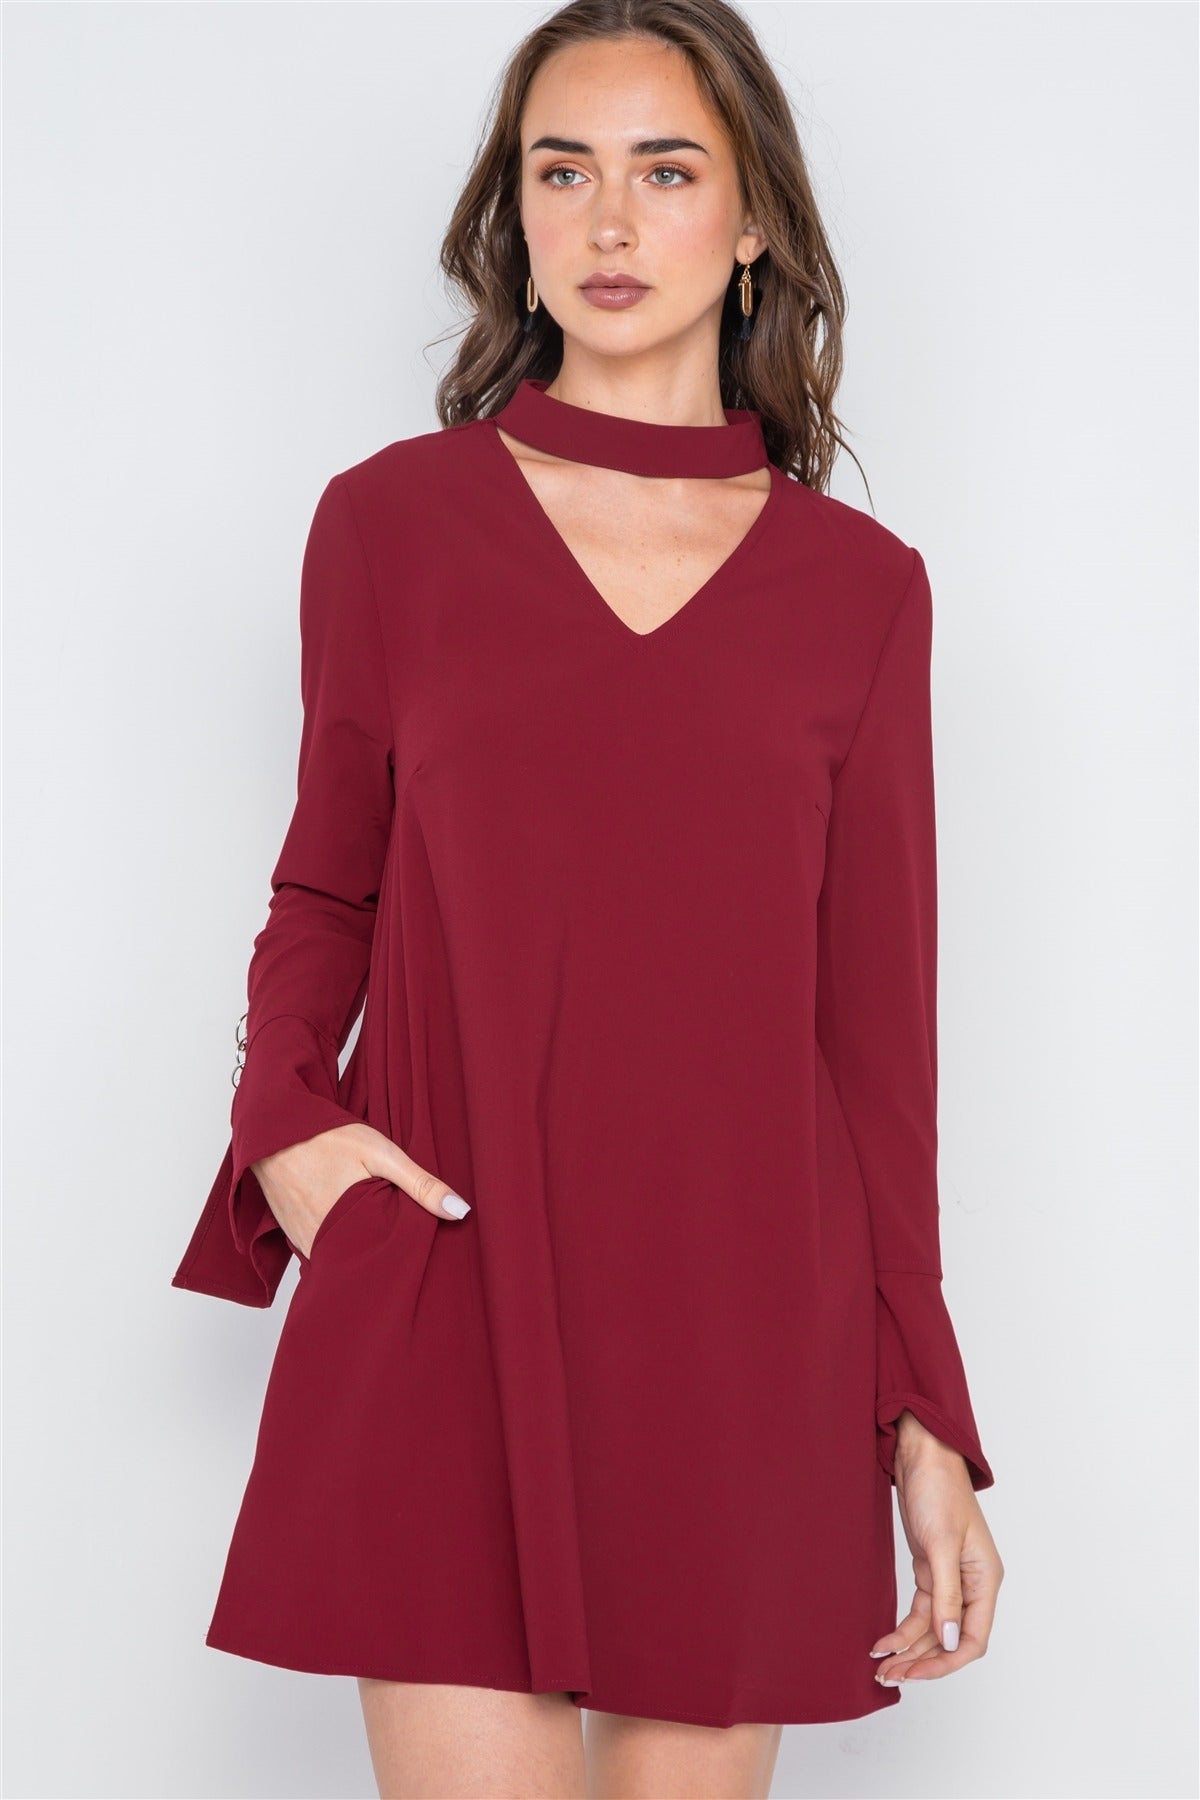 Our Best 100% Polyester Long Sleeve V-cut Out Side Pockets Solid Color Mini Dress (Wine)